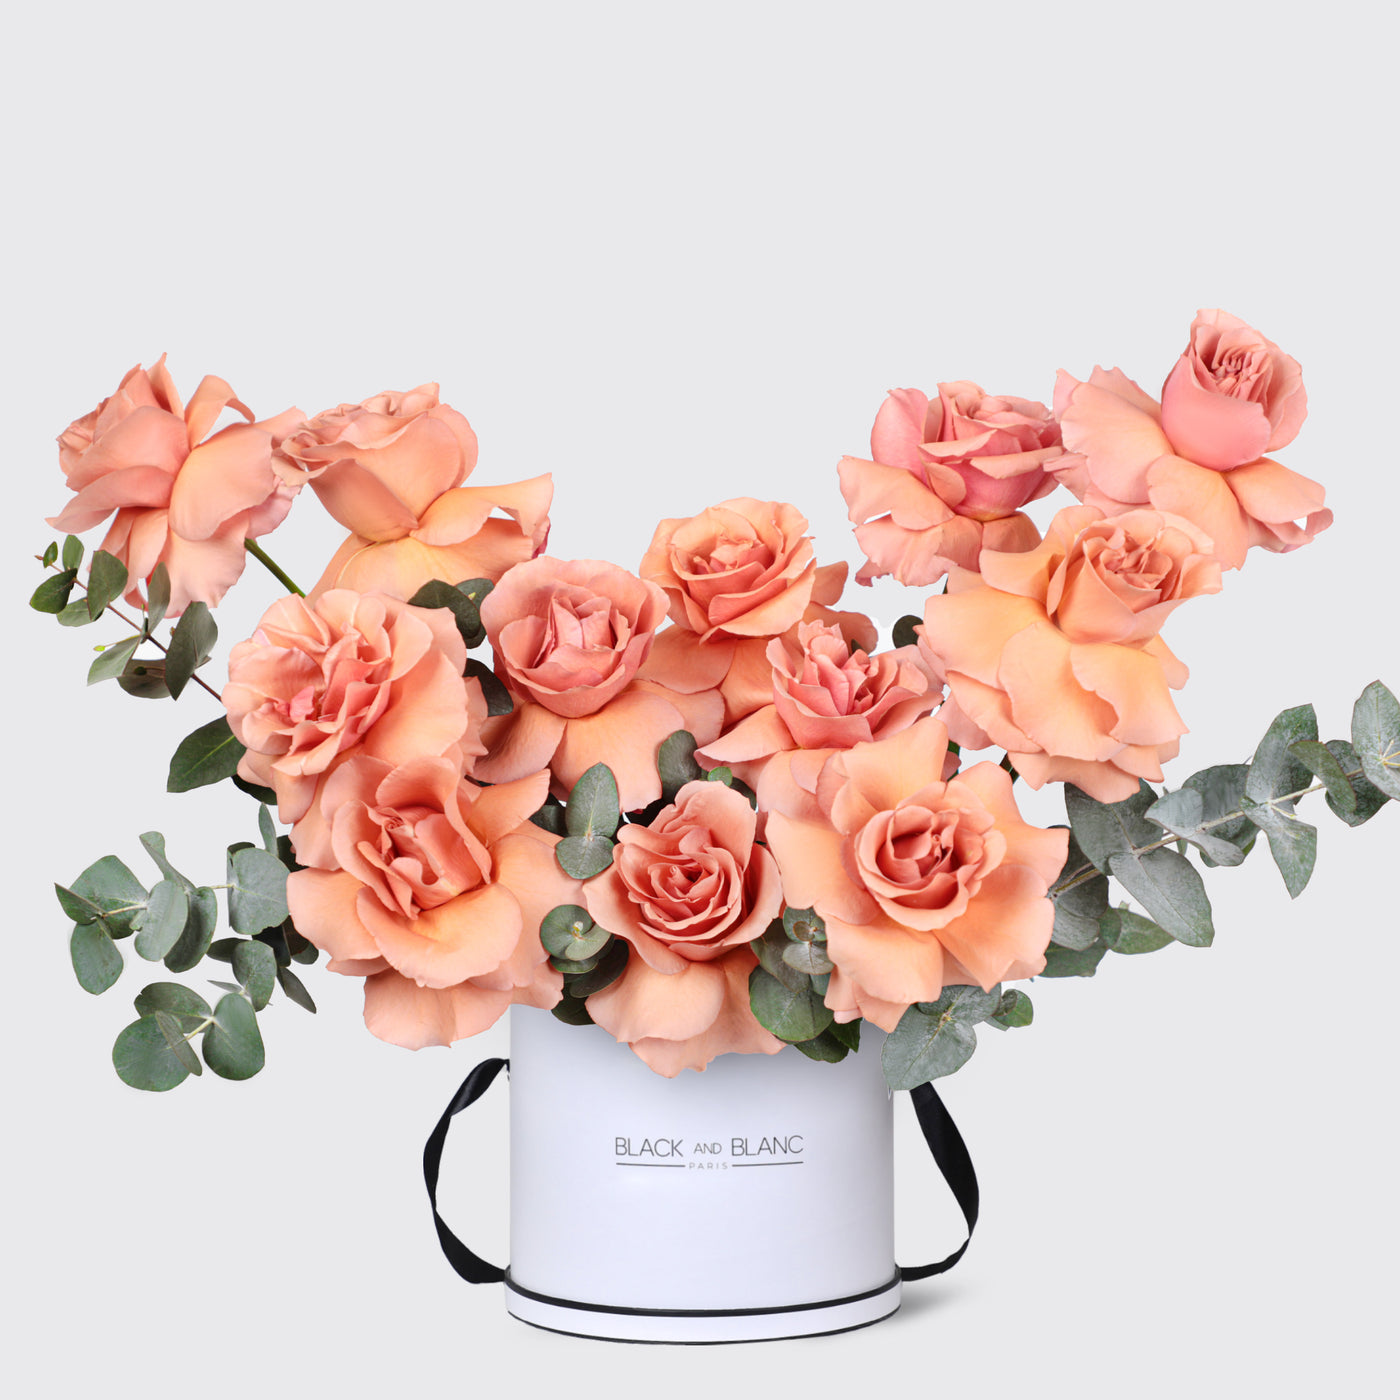 Coral Charm in Box - Fresh Flowers